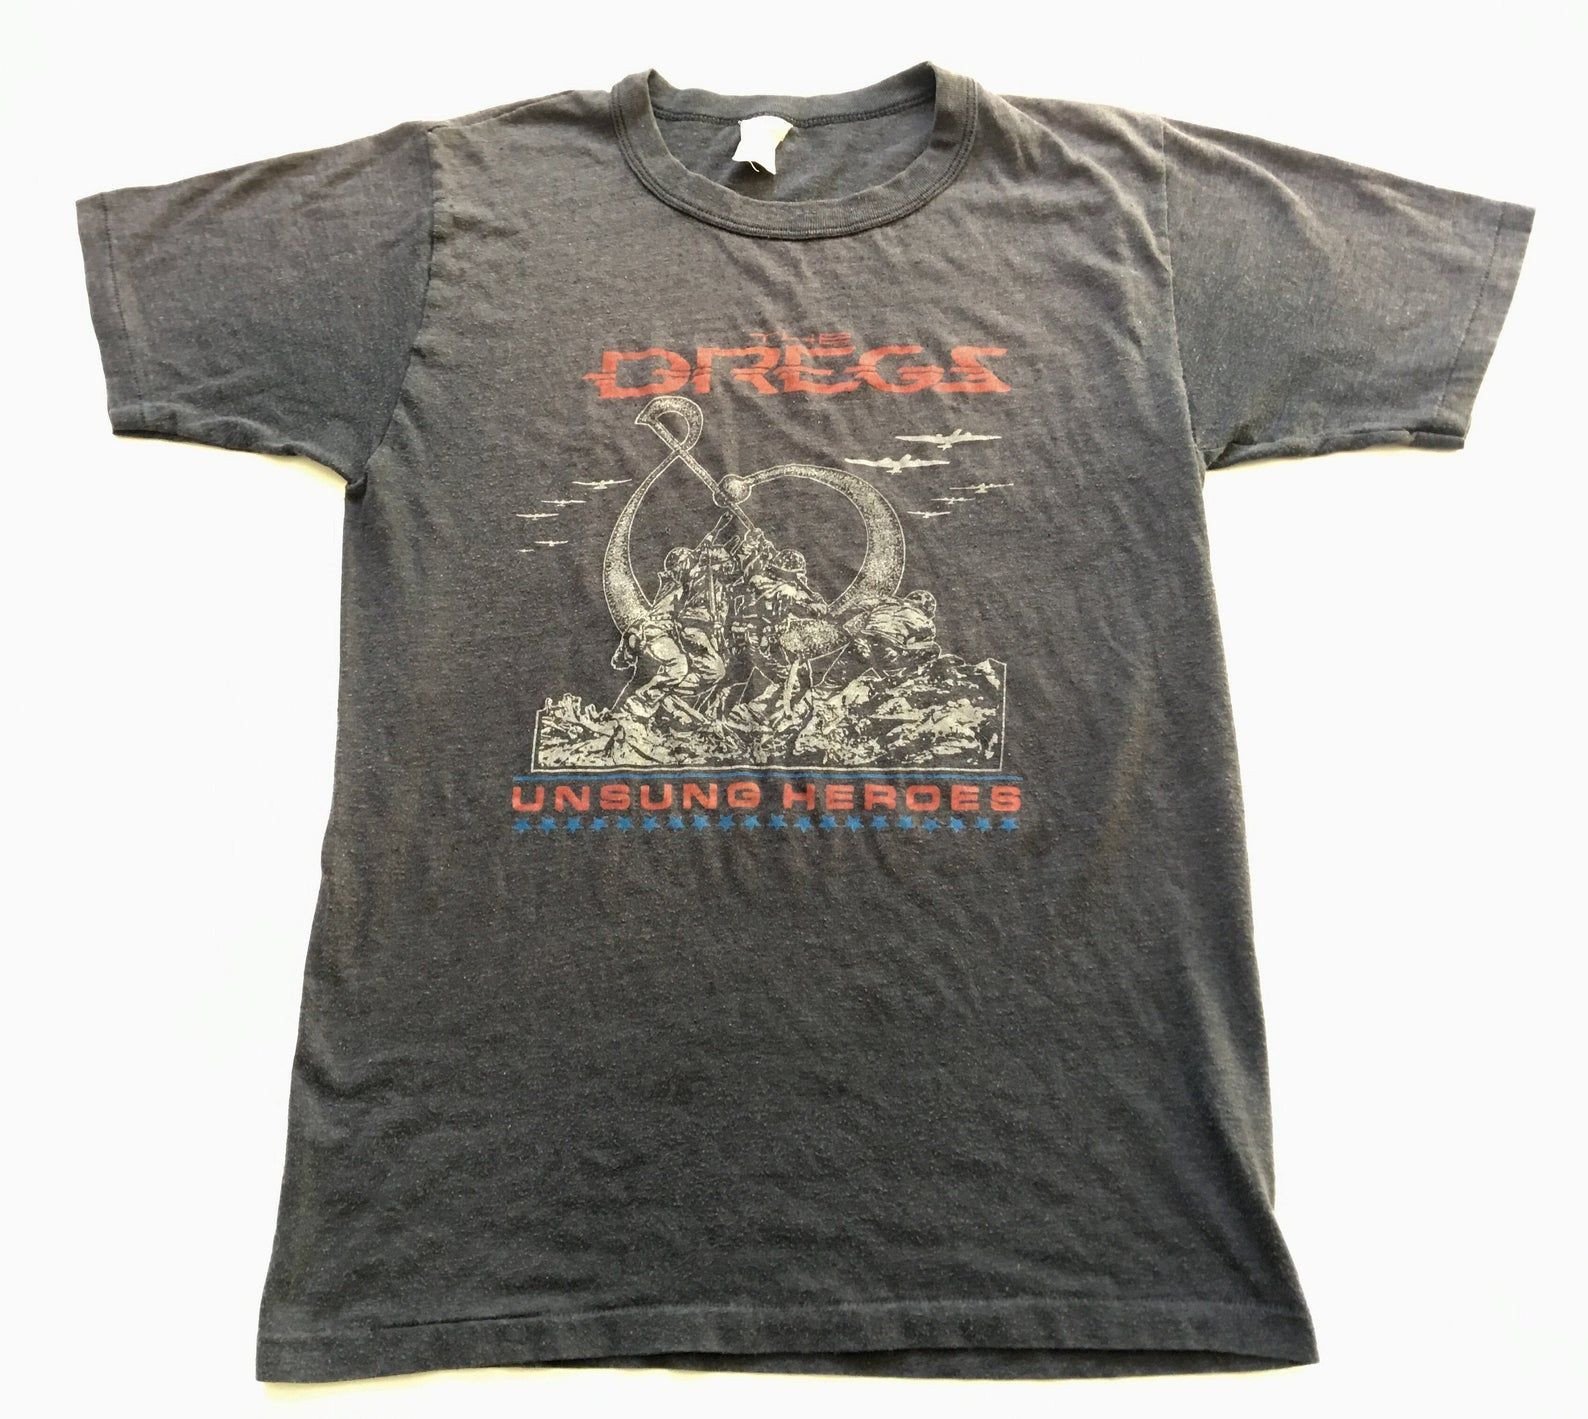 1980S Dixie Dregs The Dregs Unsung Heroes Distressed Vintage T Shirt //